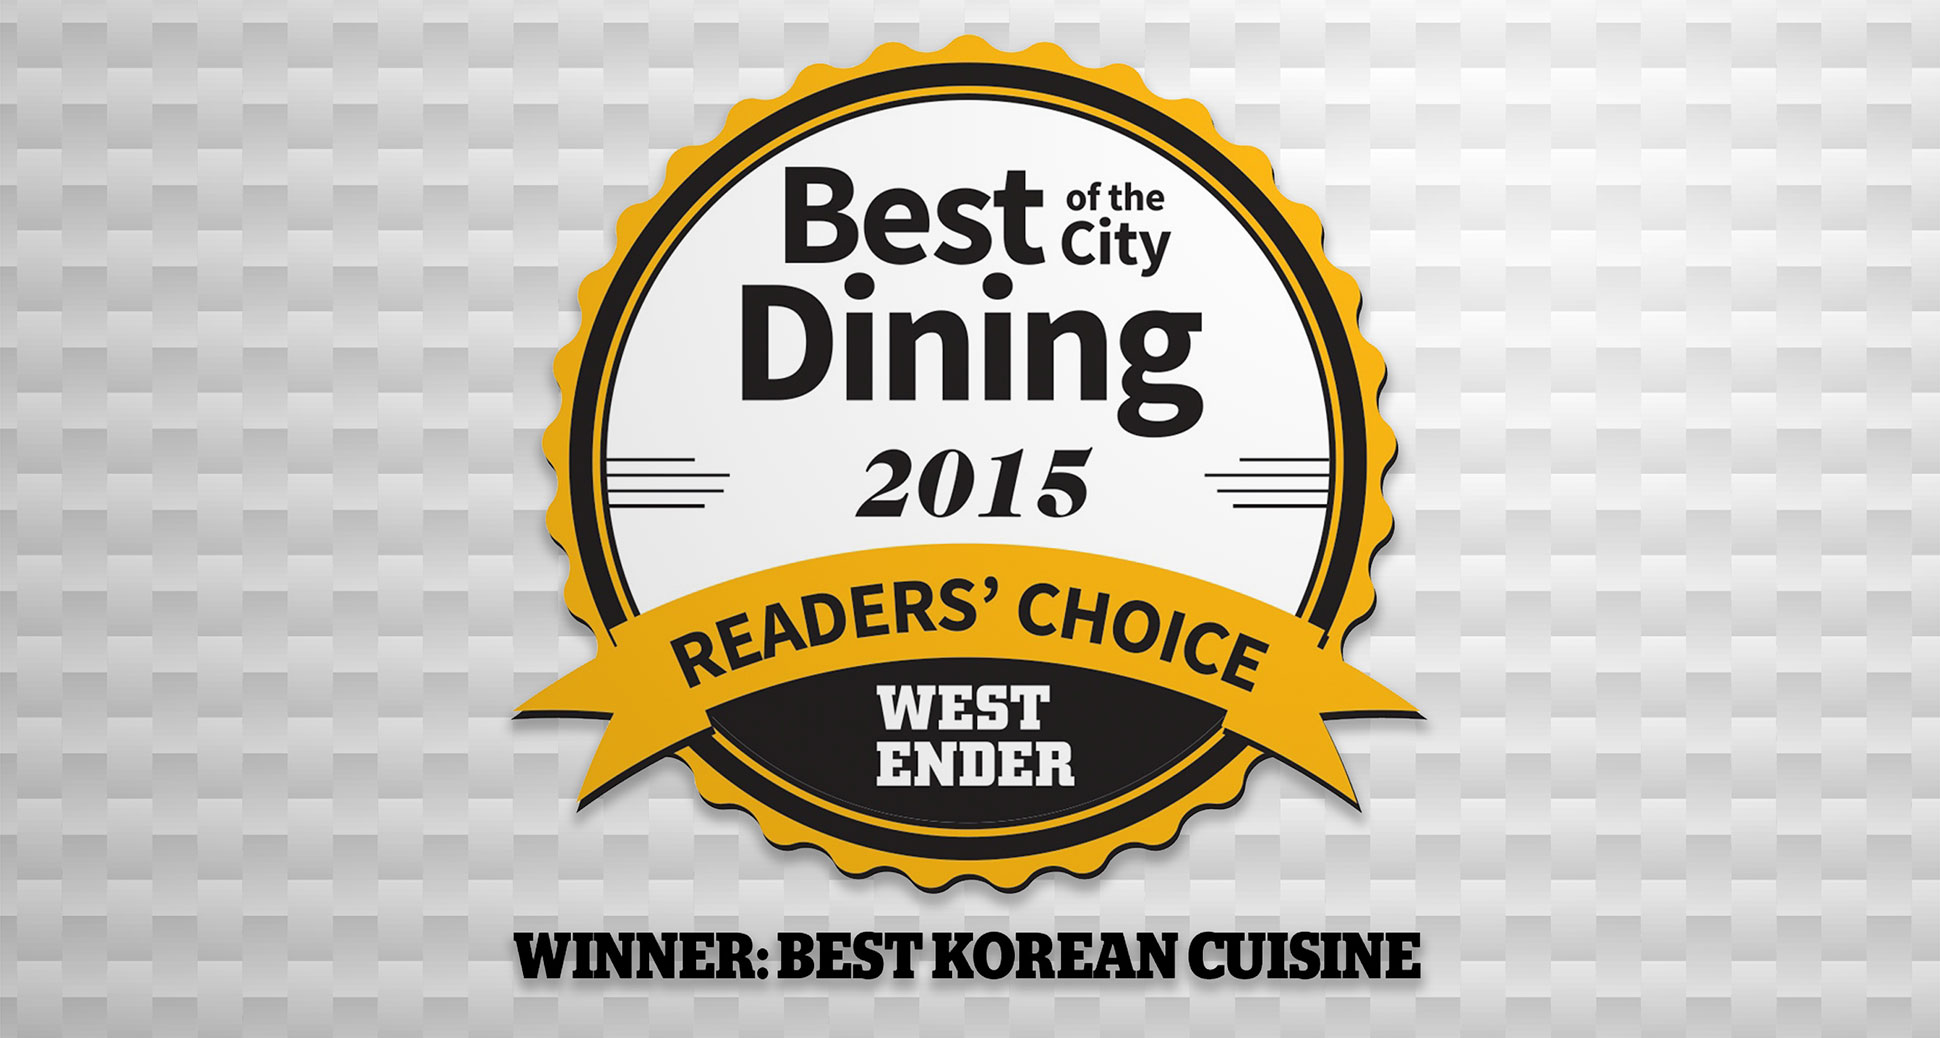 Sura is the best Korean winner of WE Vancouver’s best of the city dining awards 2015